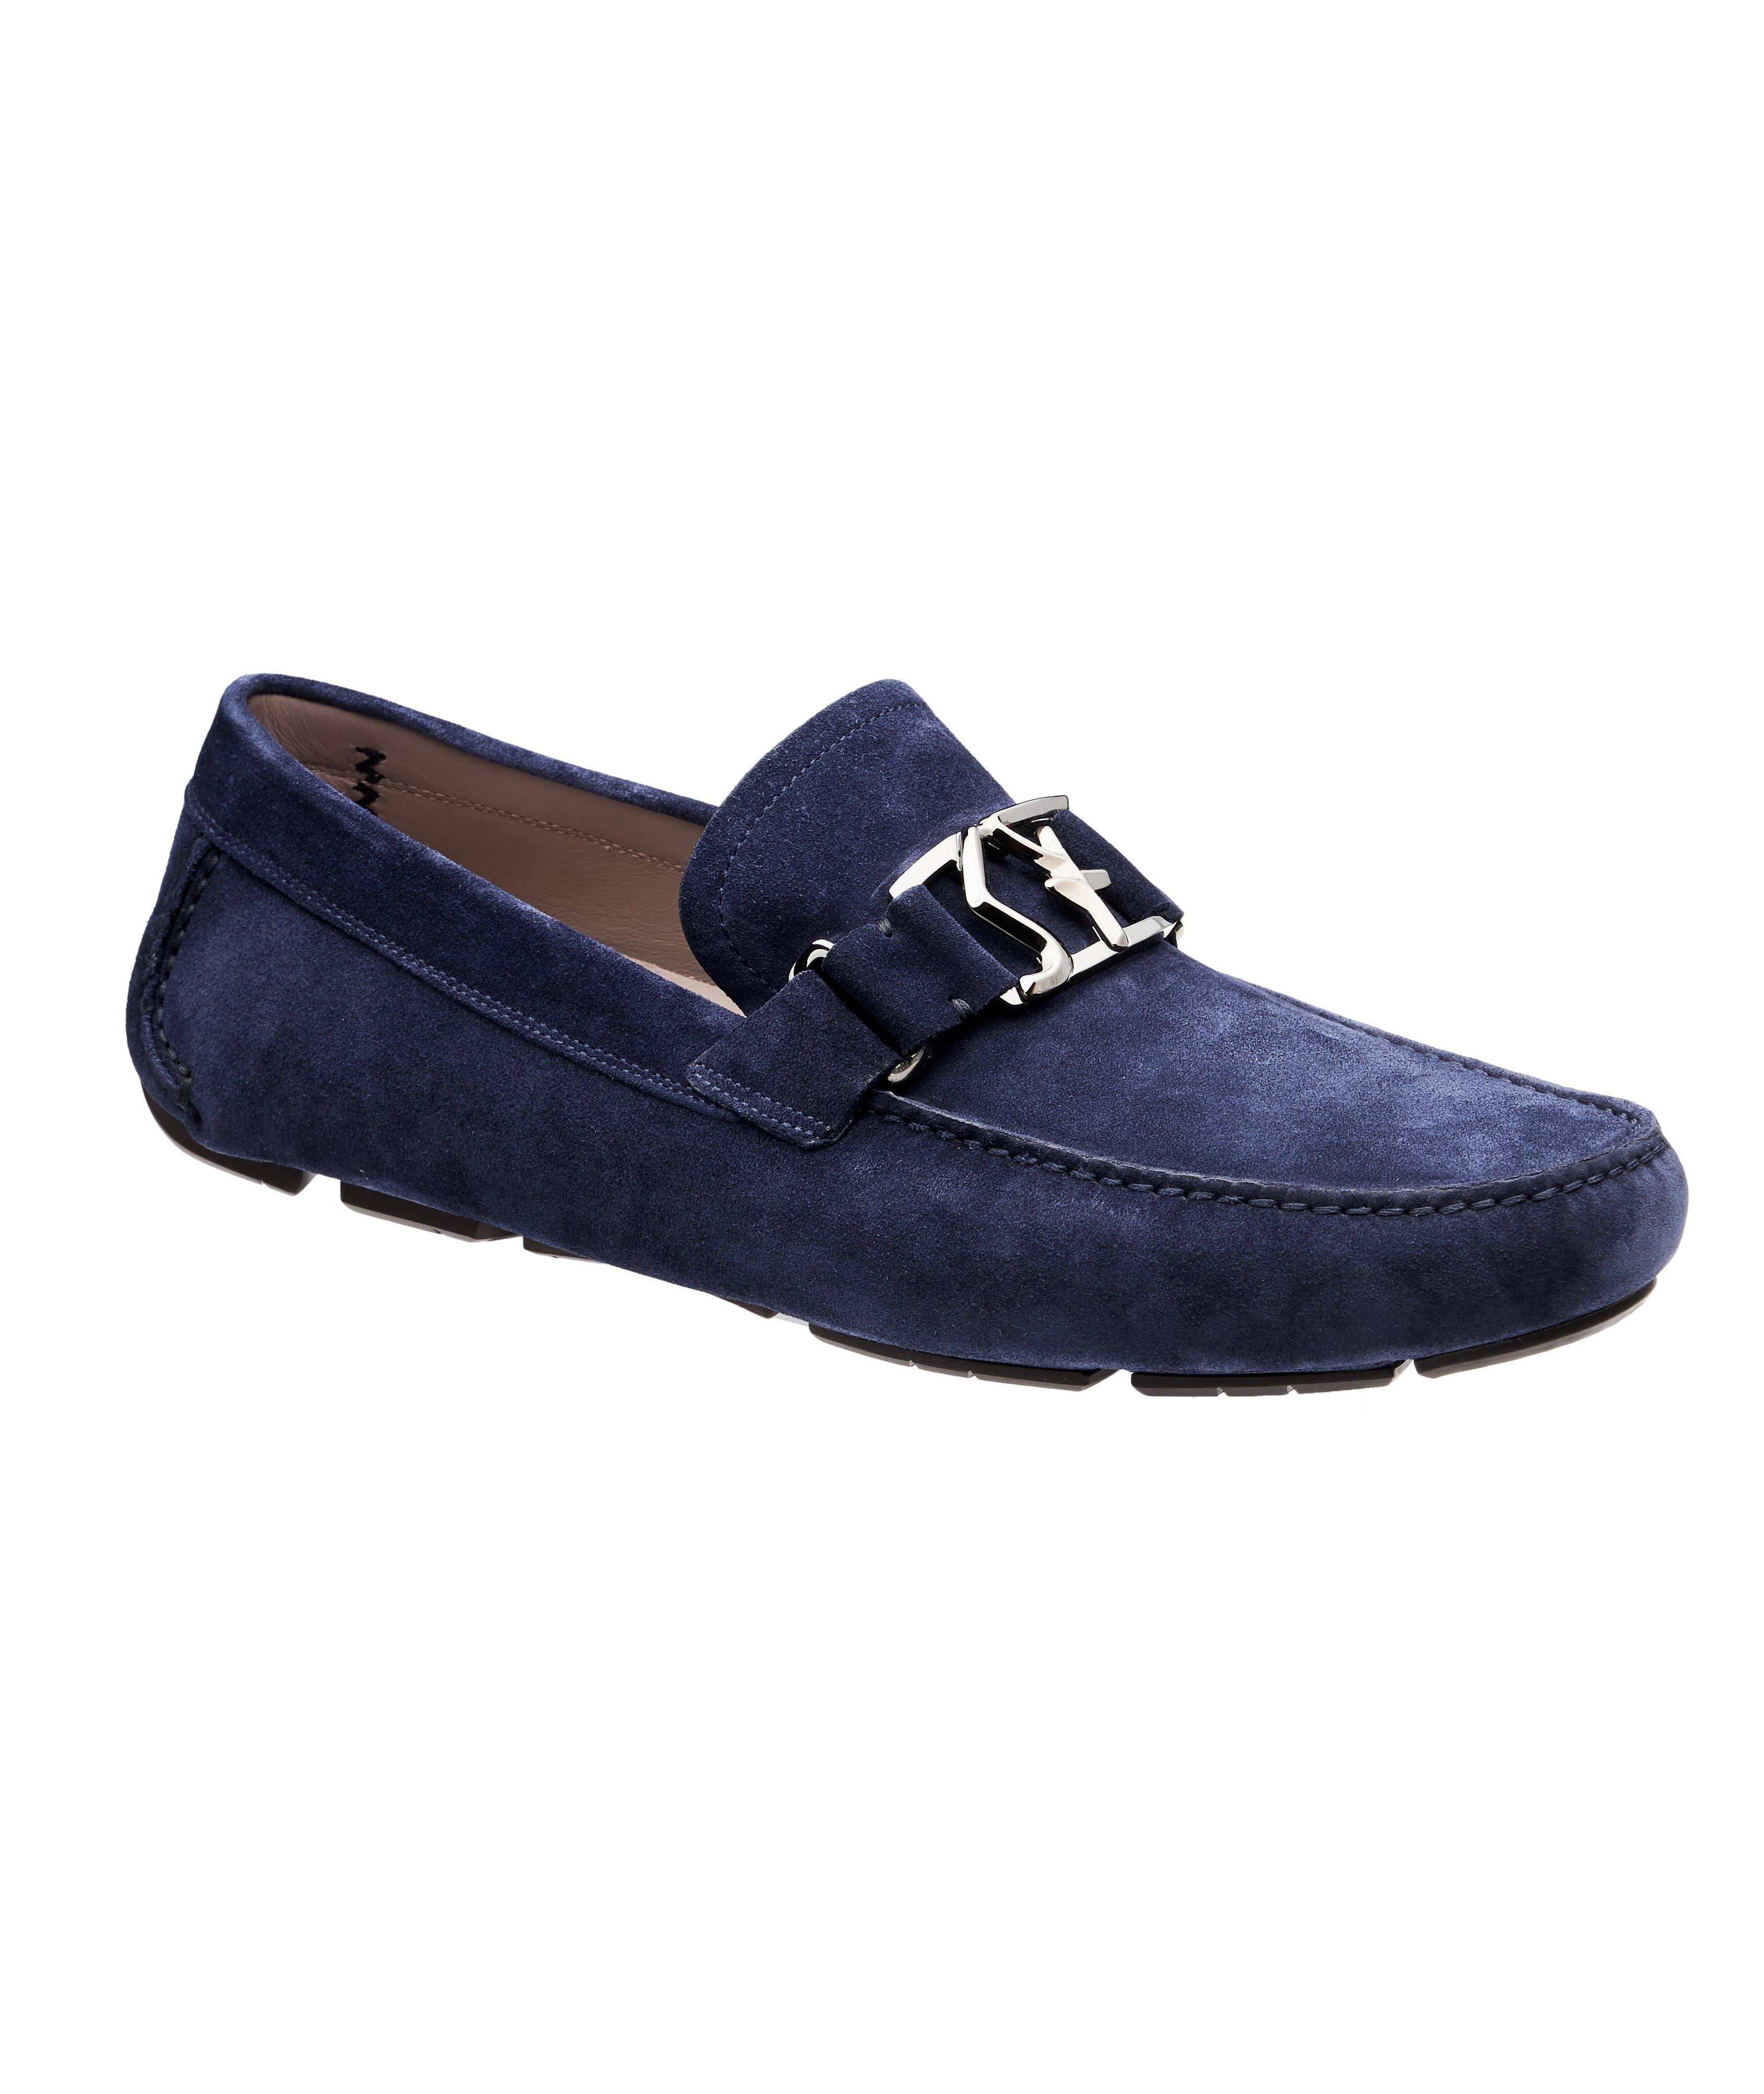 Peter Calfskin Suede Driving Shoes image 0